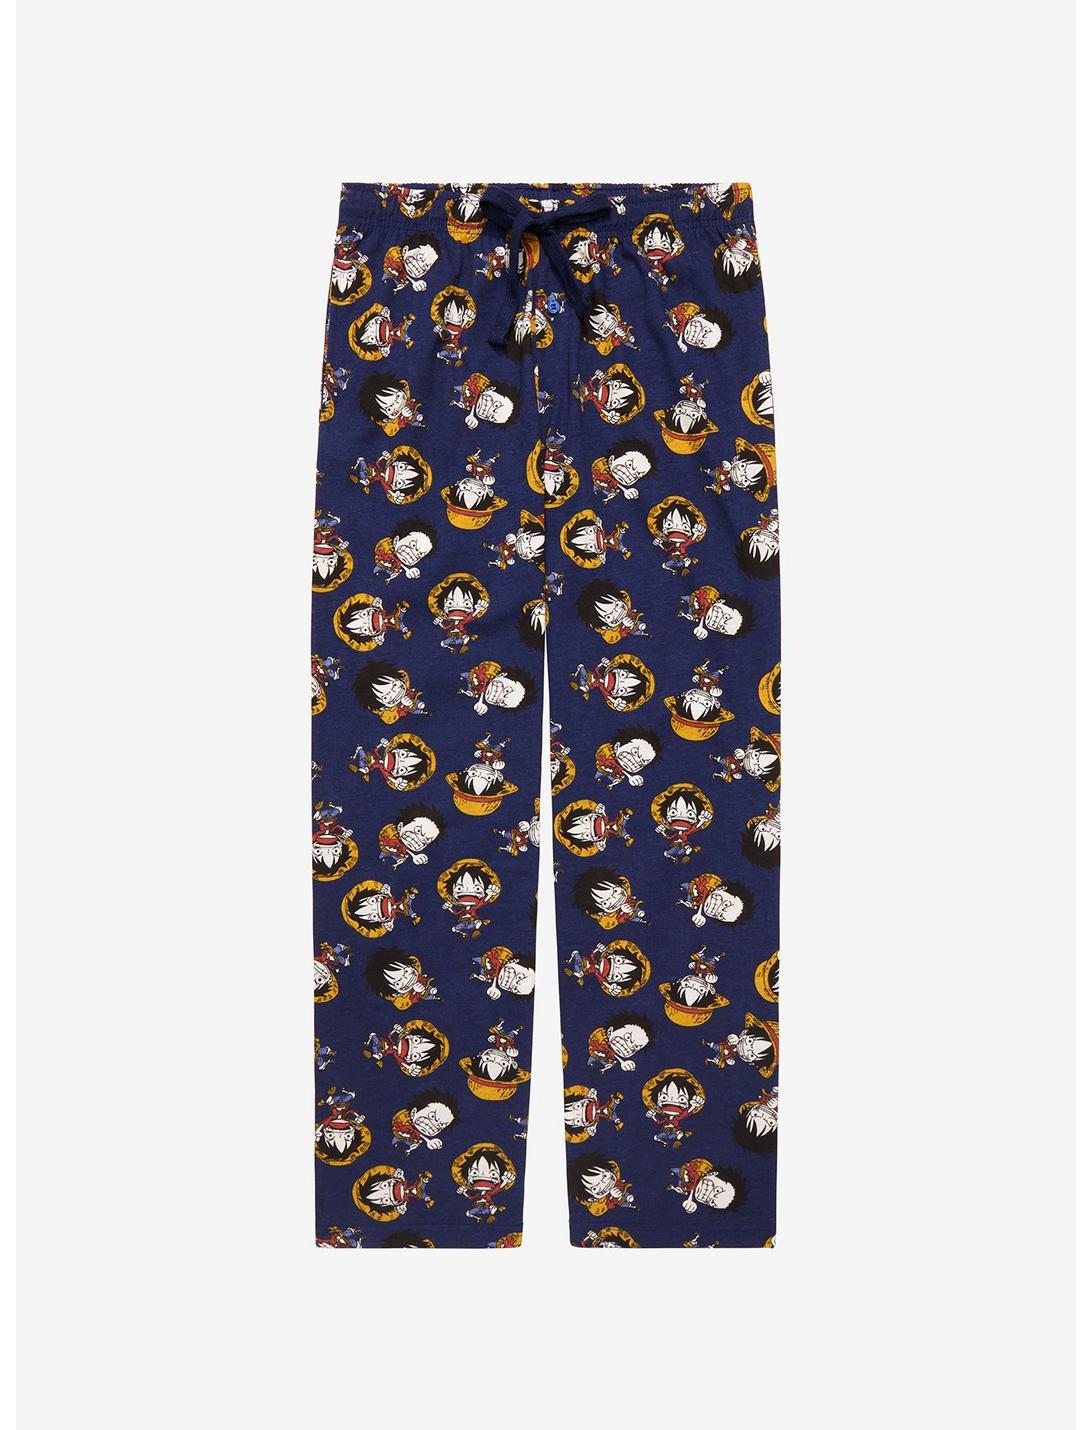 One Piece Chibi Monkey D. Luffy Sleep Pants - BoxLunch Exclusive, CHARCOAL, hi-res